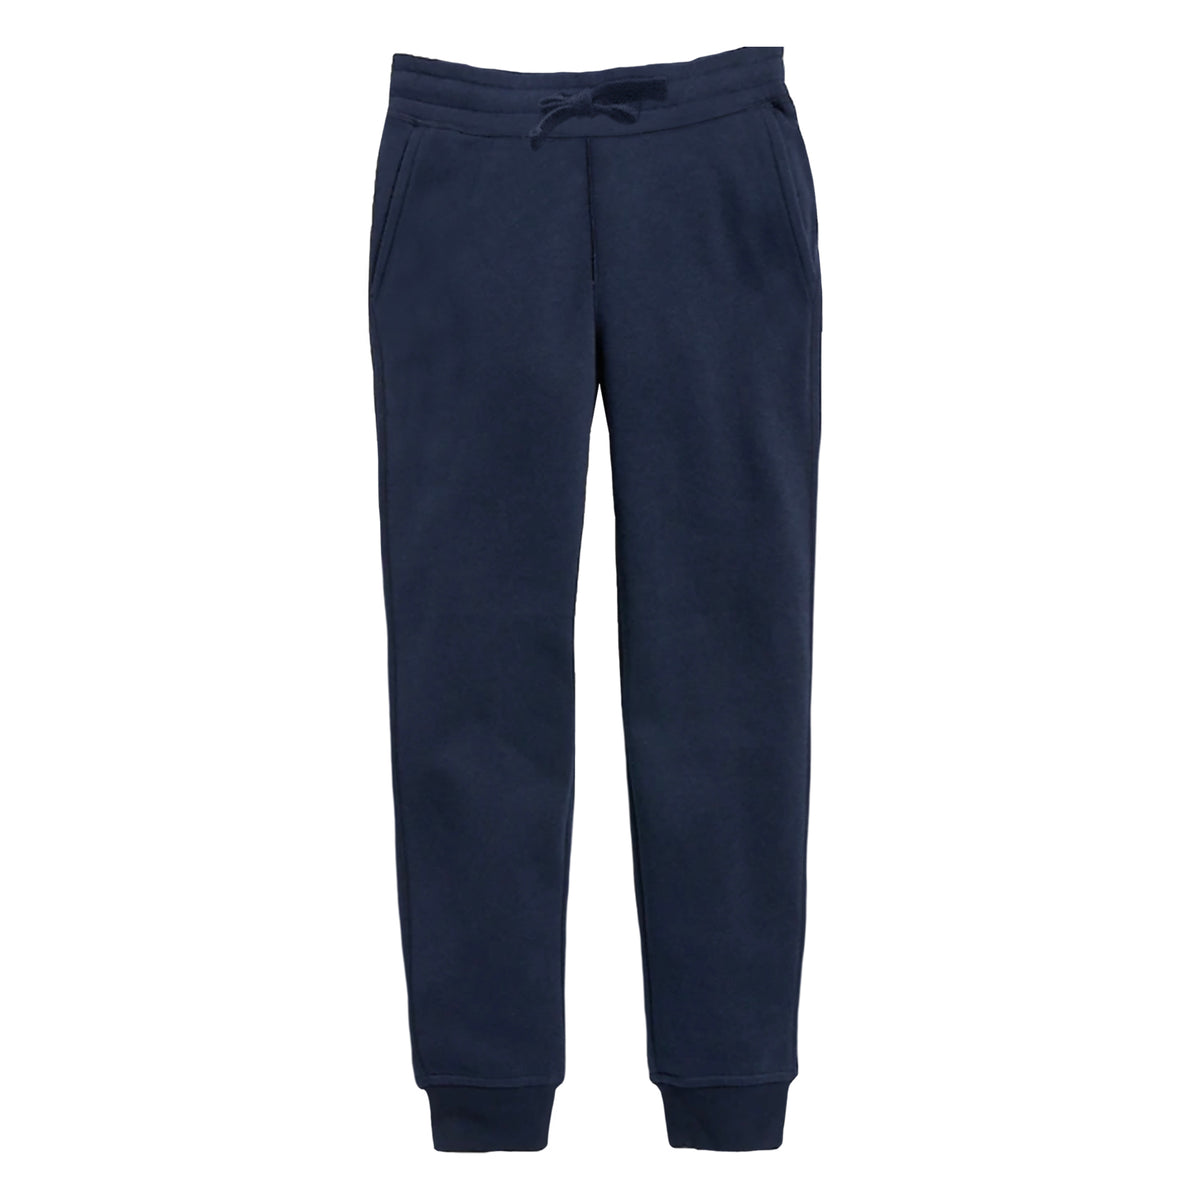 NAVY SWEATPANTS, YOUTH